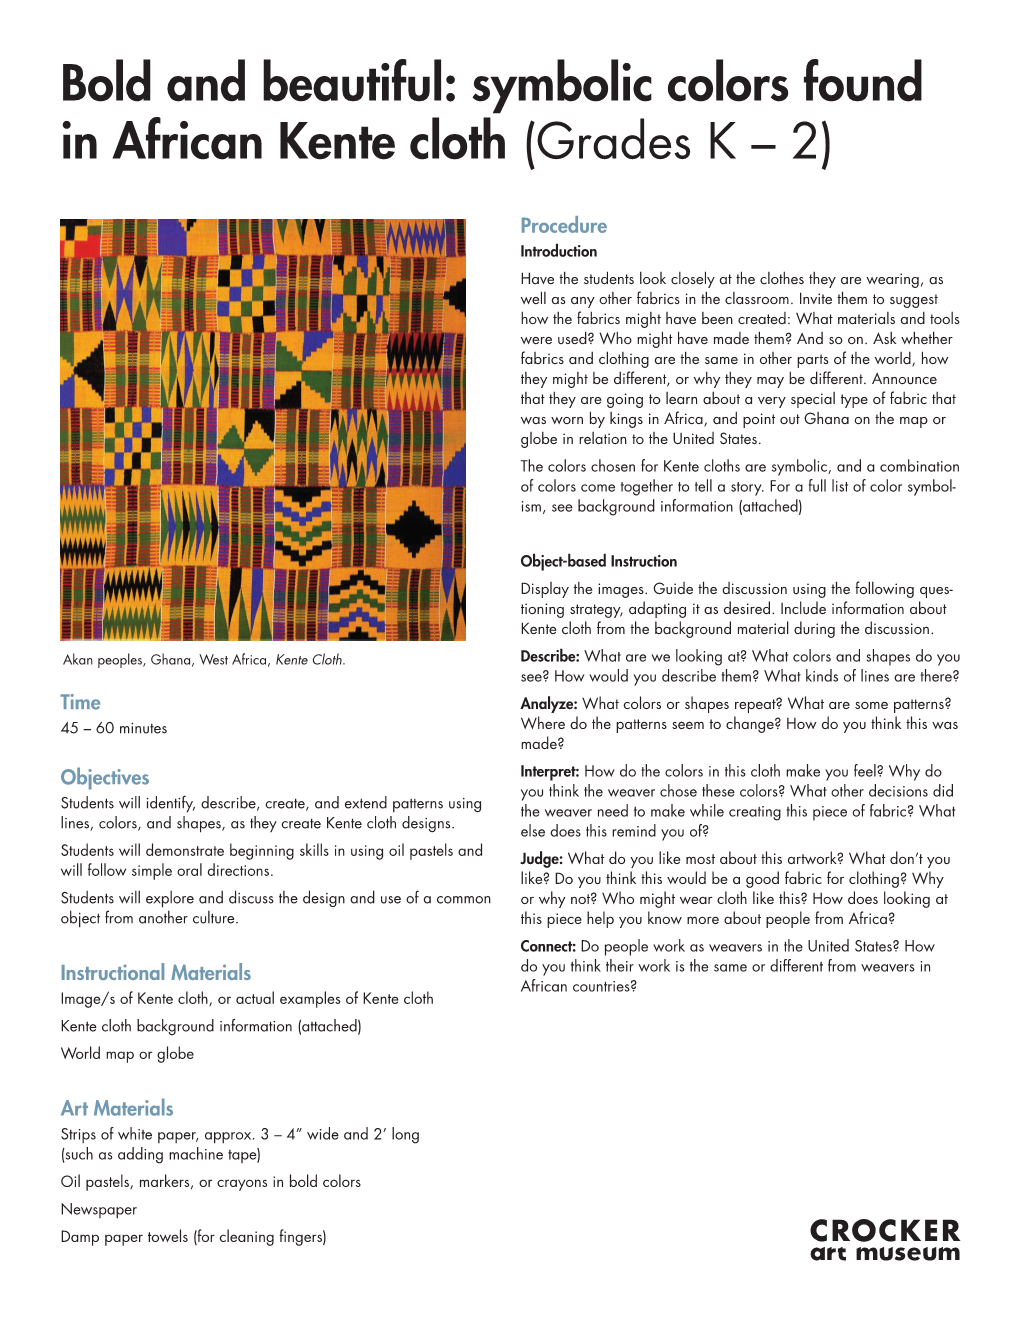 Symbolic Colors Found in African Kente Cloth (Grades K – 2)